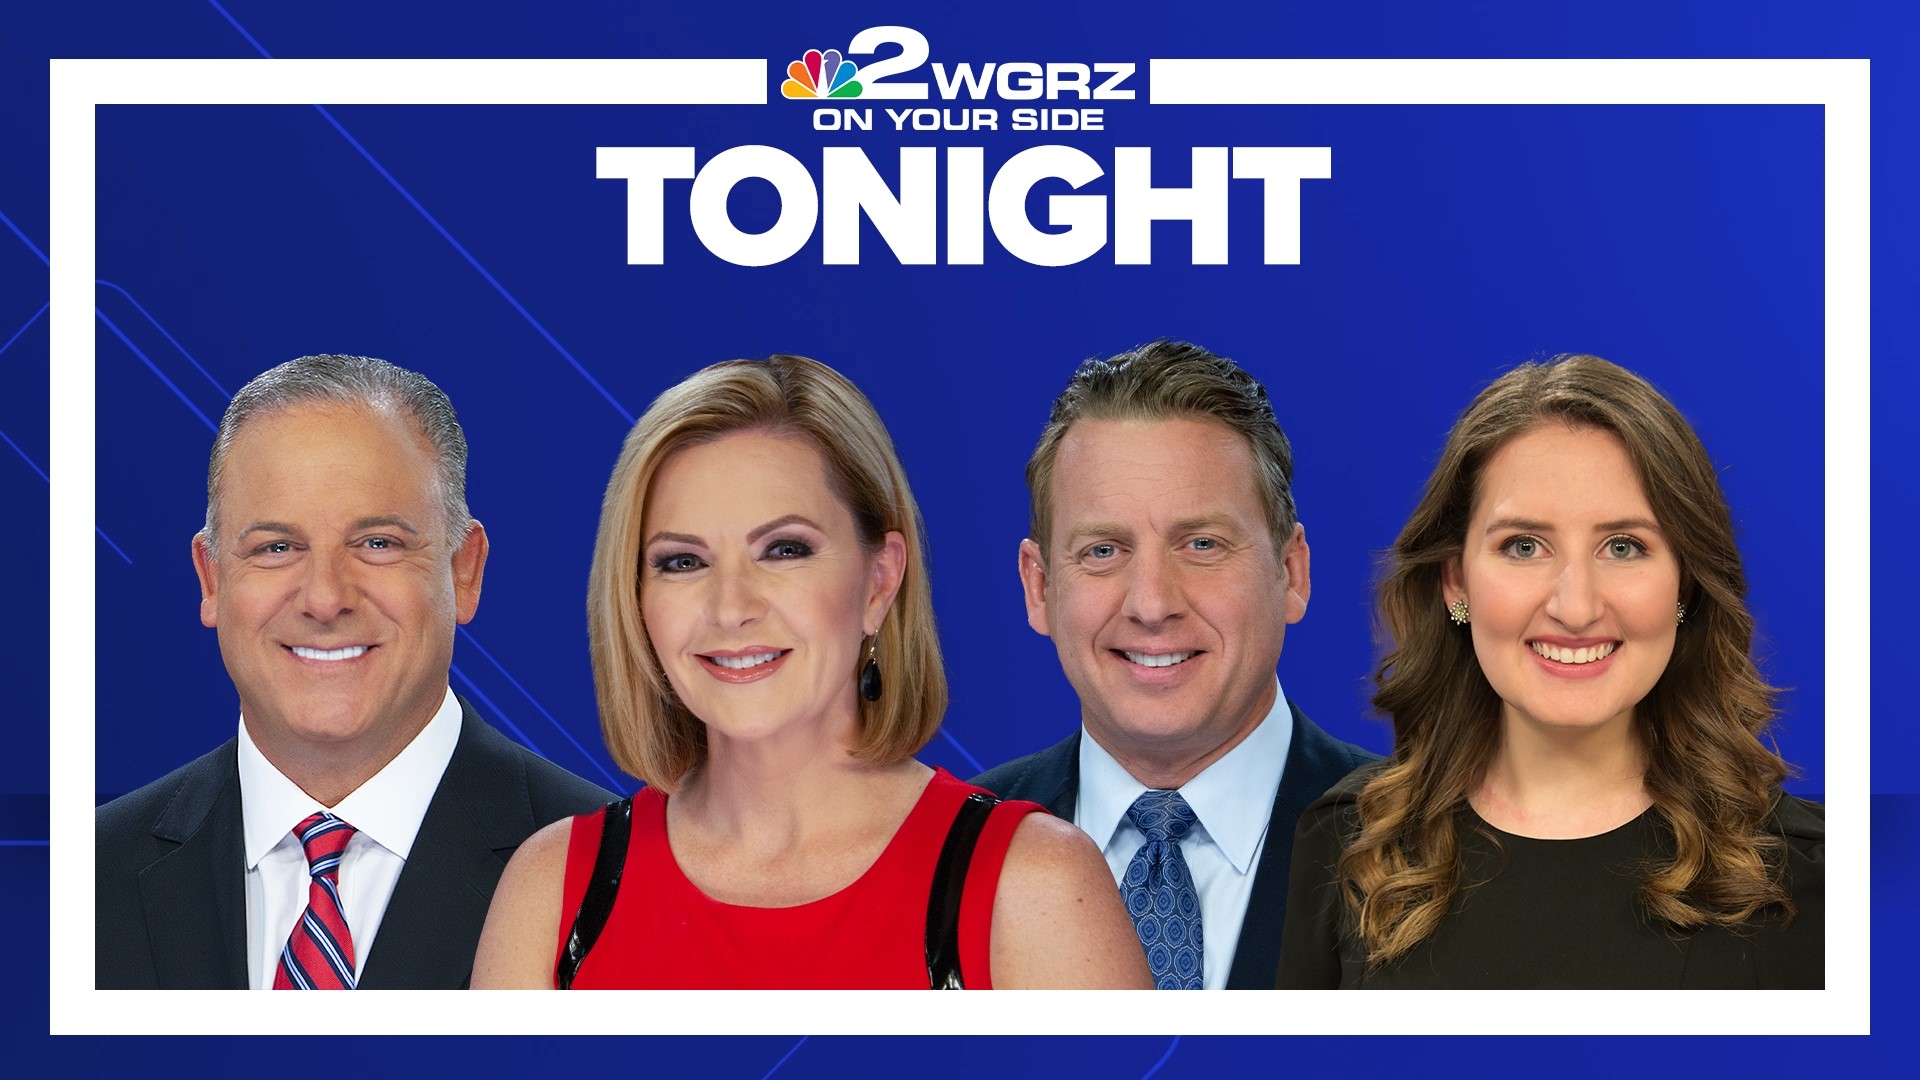 The Channel 2 News Team presents a report of local and national news events, along with the latest weather forecast and sports updates.
